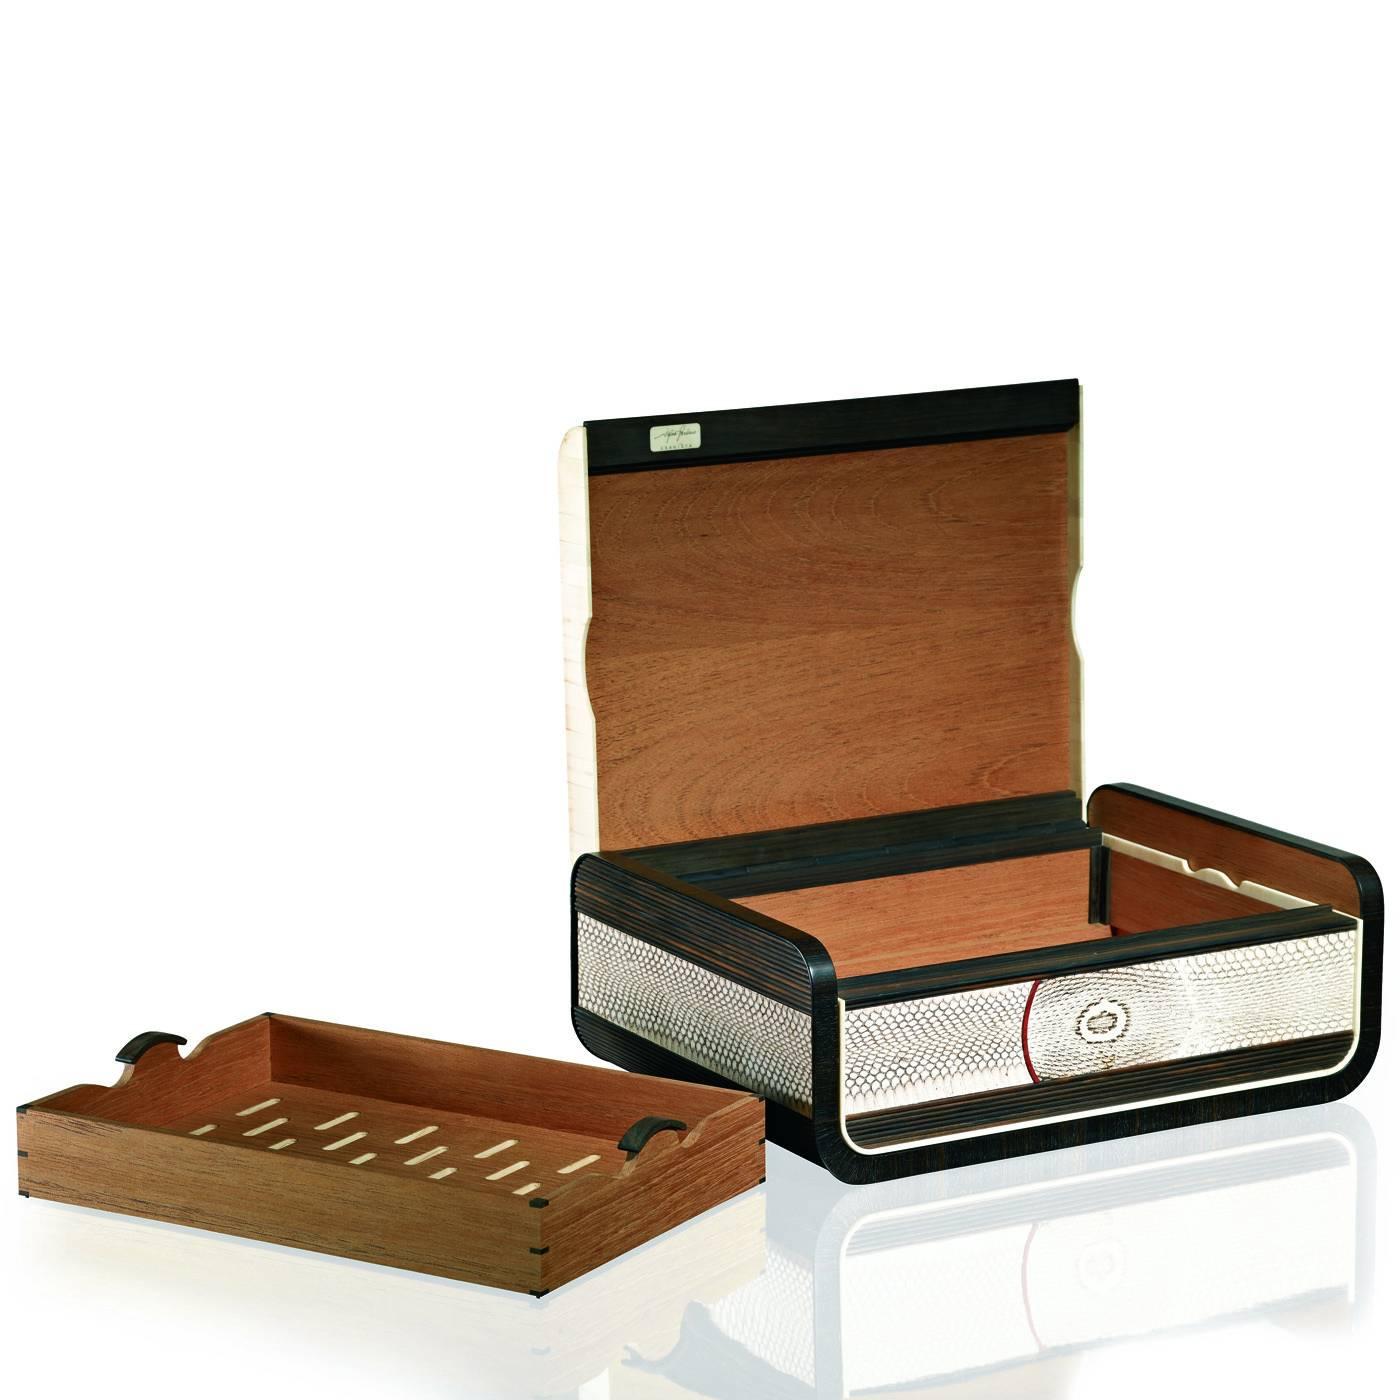 This elegant cigar box in ebony Macassar wood, with its distinctive dark brown stripes, is decorated with horn accents around its perimeter. The lid is linked to the box thanks to a zip in ebony wood decorated with iguana skin. Snake skin decorates